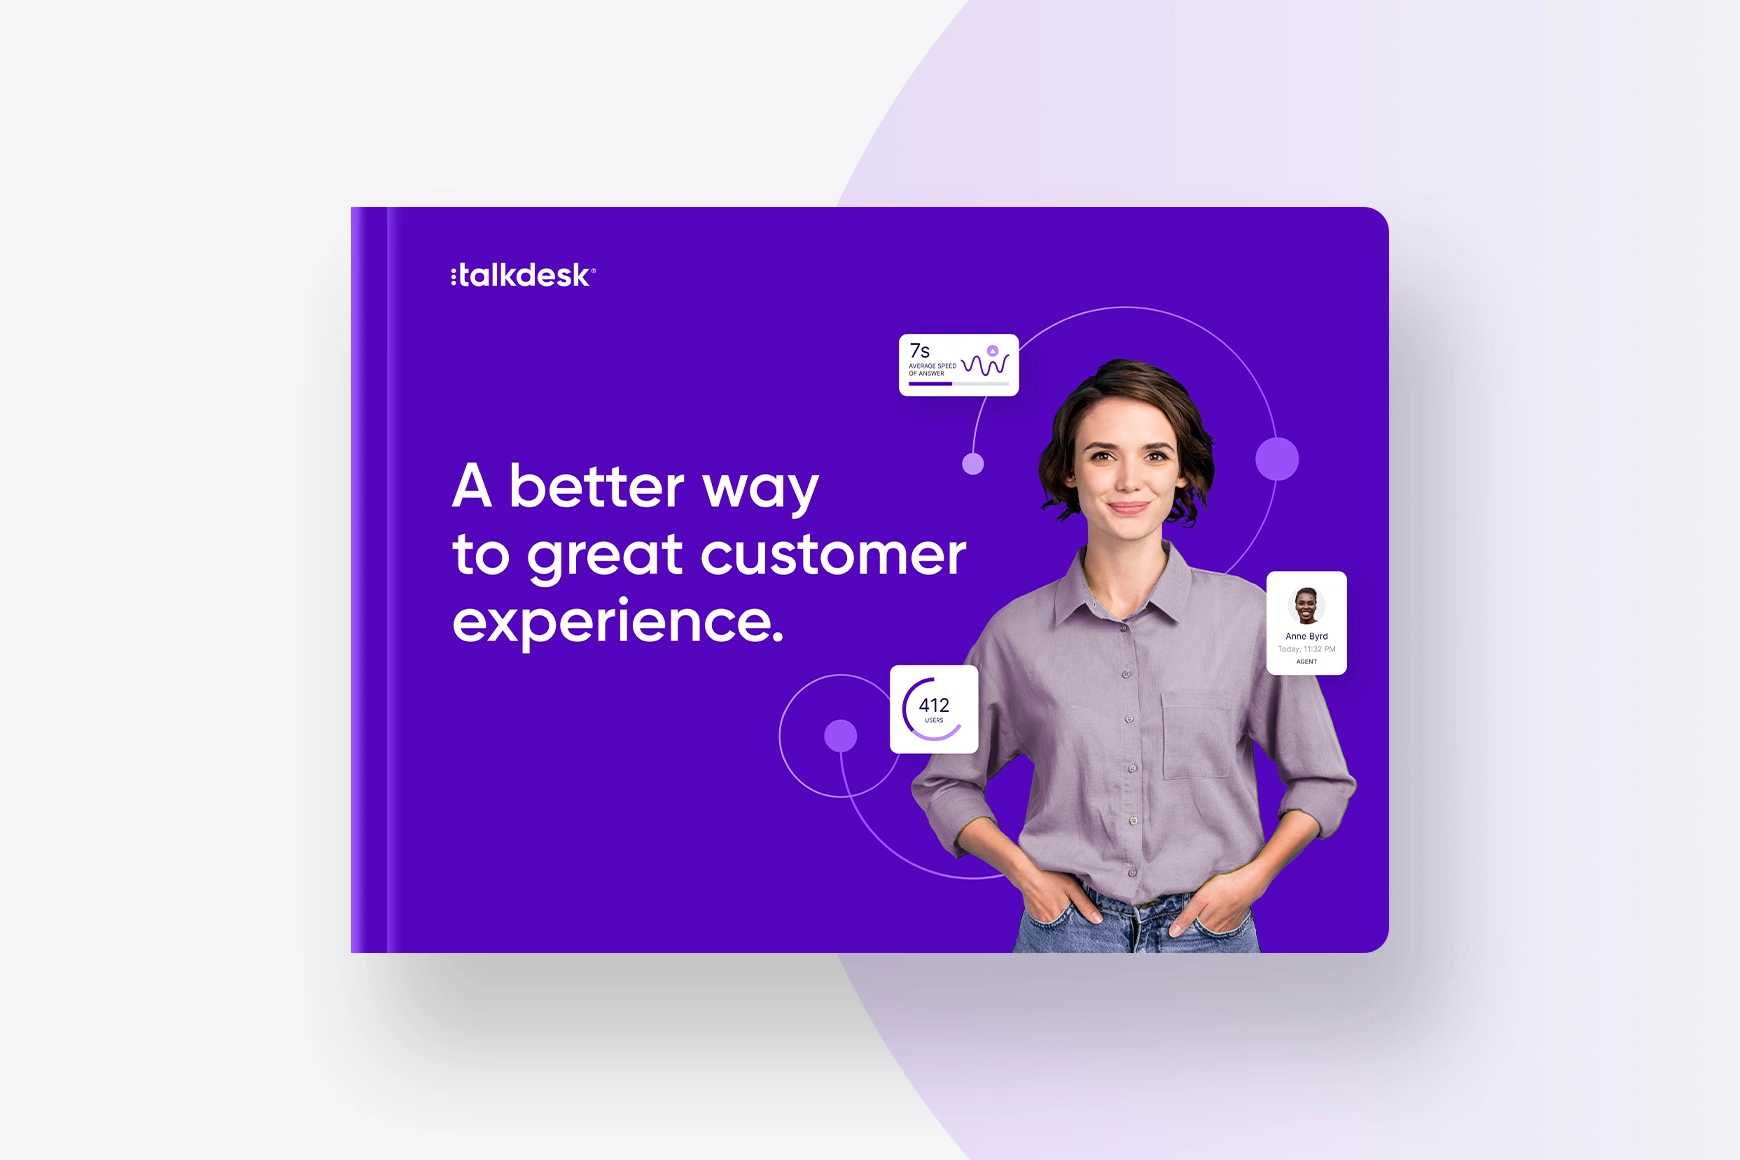 A better way to great customer experience